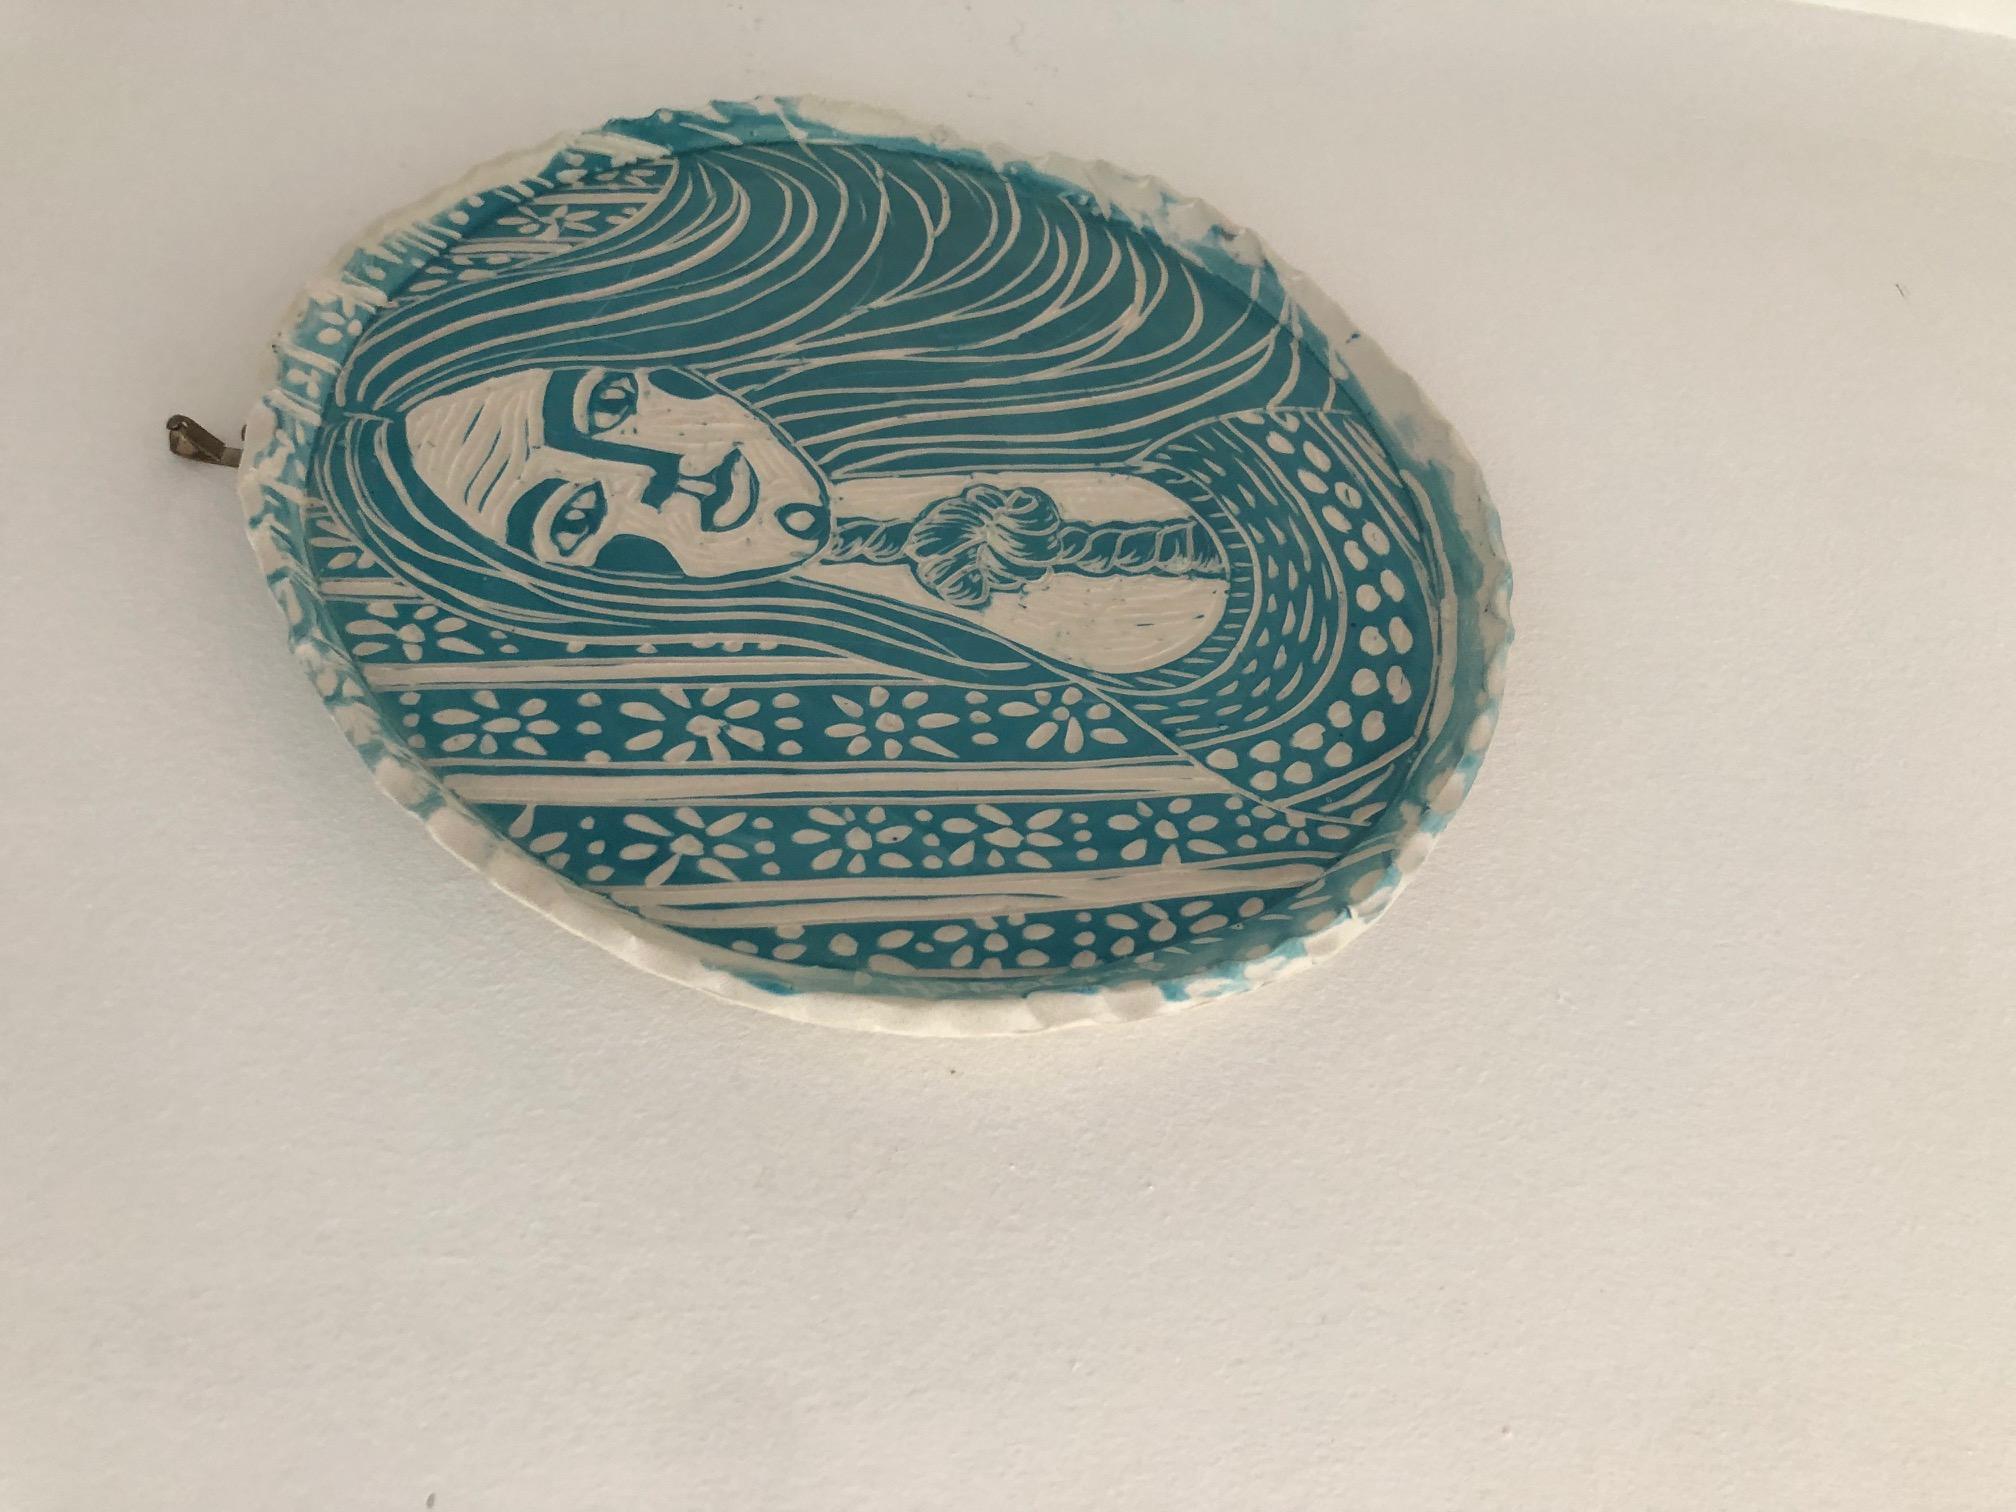 Contemporary Our History Here, 2018, Carved Porcelain Plate